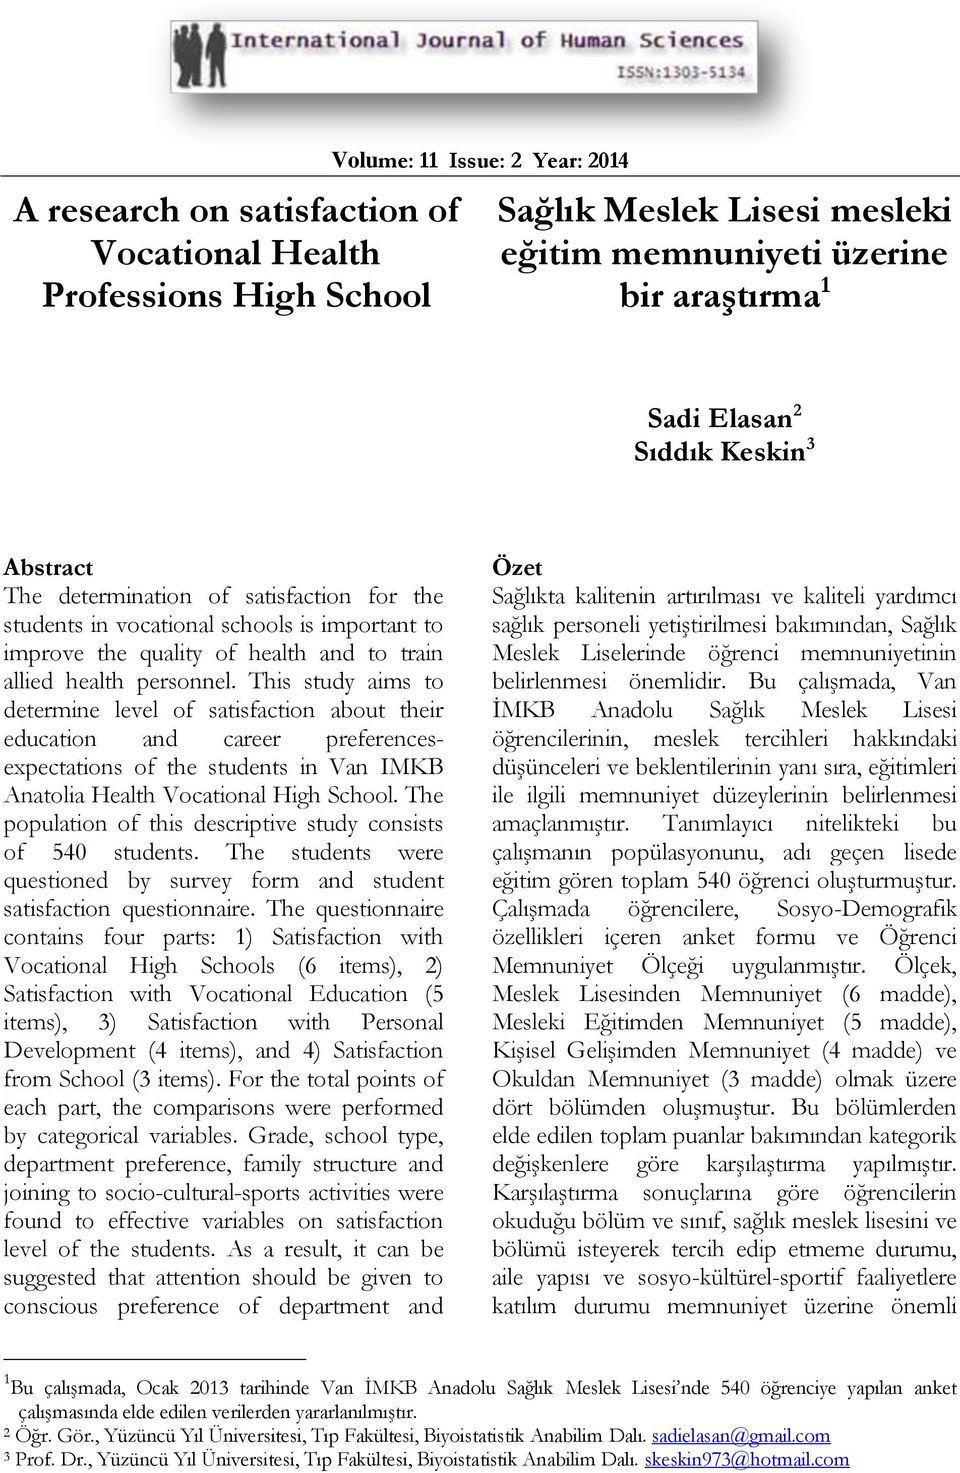 This study aims to determine level of satisfaction about their education and career preferencesexpectations of the students in Van IMKB Anatolia Health Vocational High School.